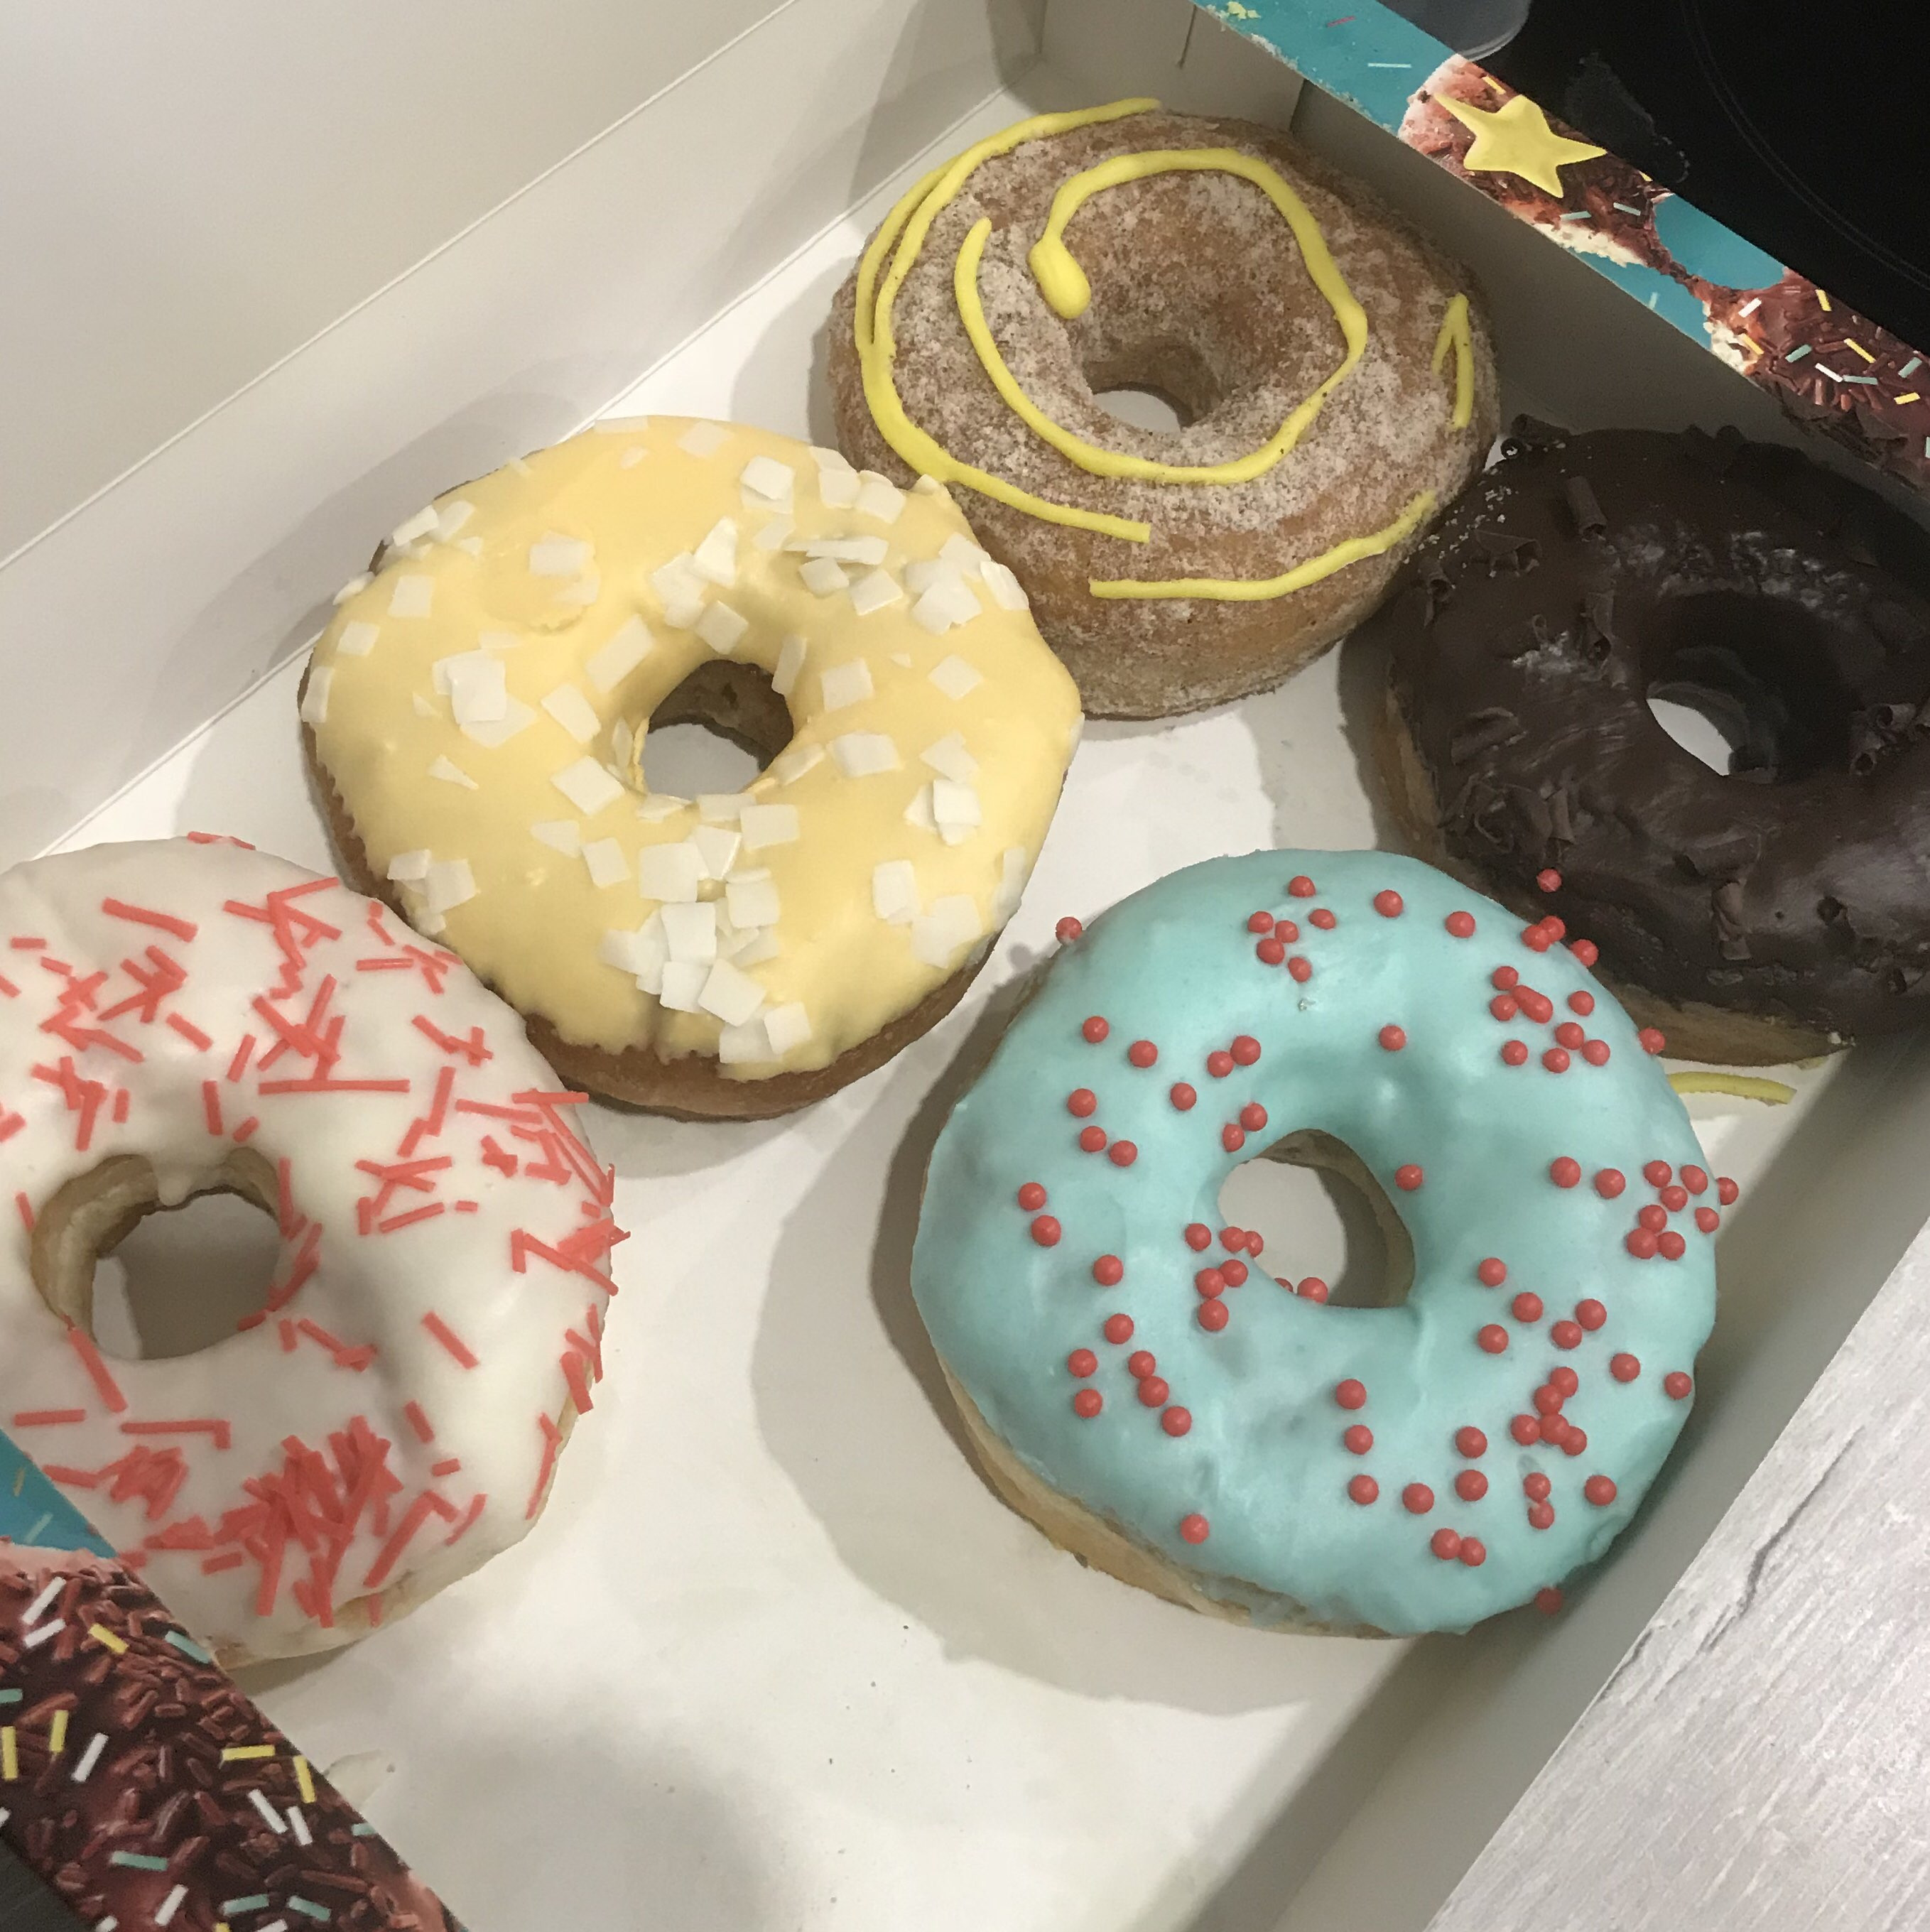 Star donuts. Star Donuts Екатеринбург. Star Donat Екатеринбург. Пончики Донатс кафе. Кофе и донат.